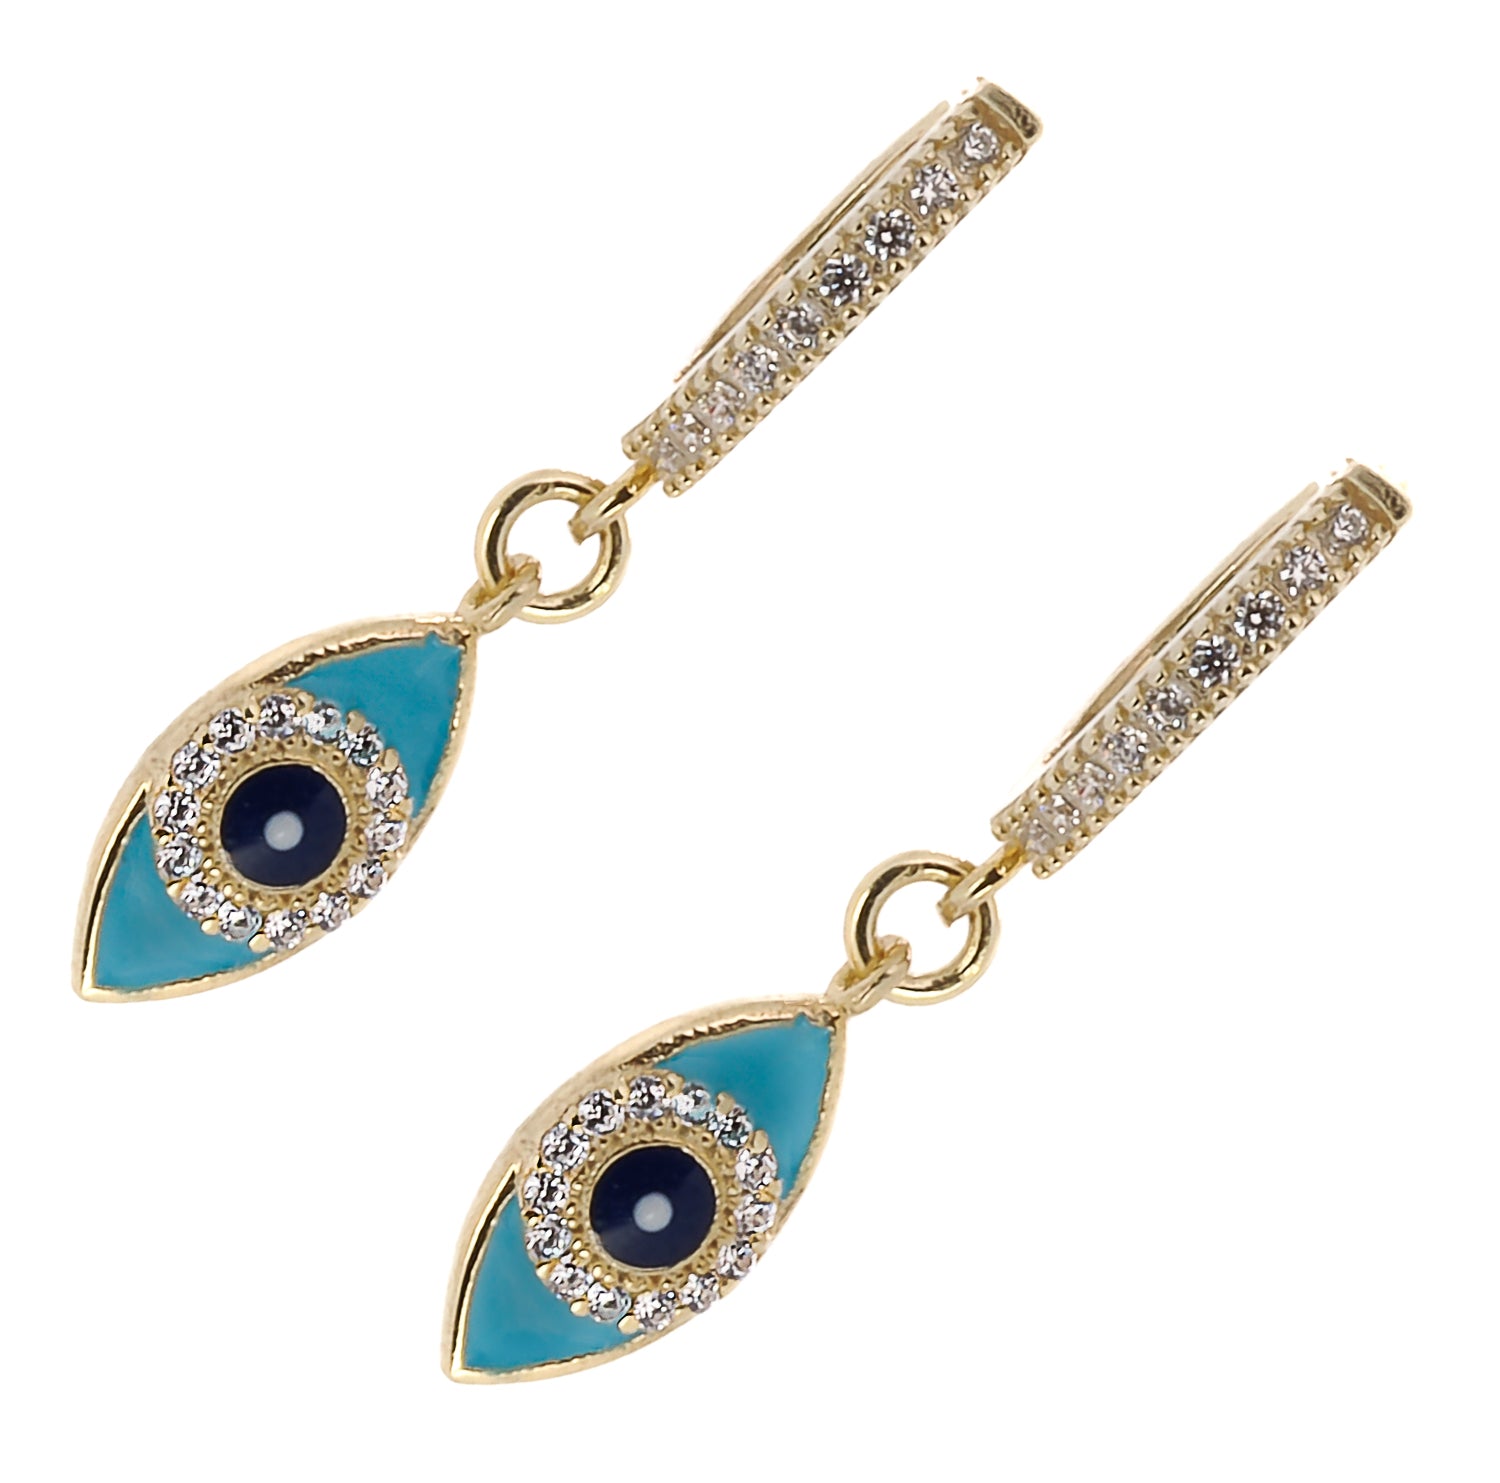 Handmade gold-plated earrings featuring a captivating turquoise evil eye design